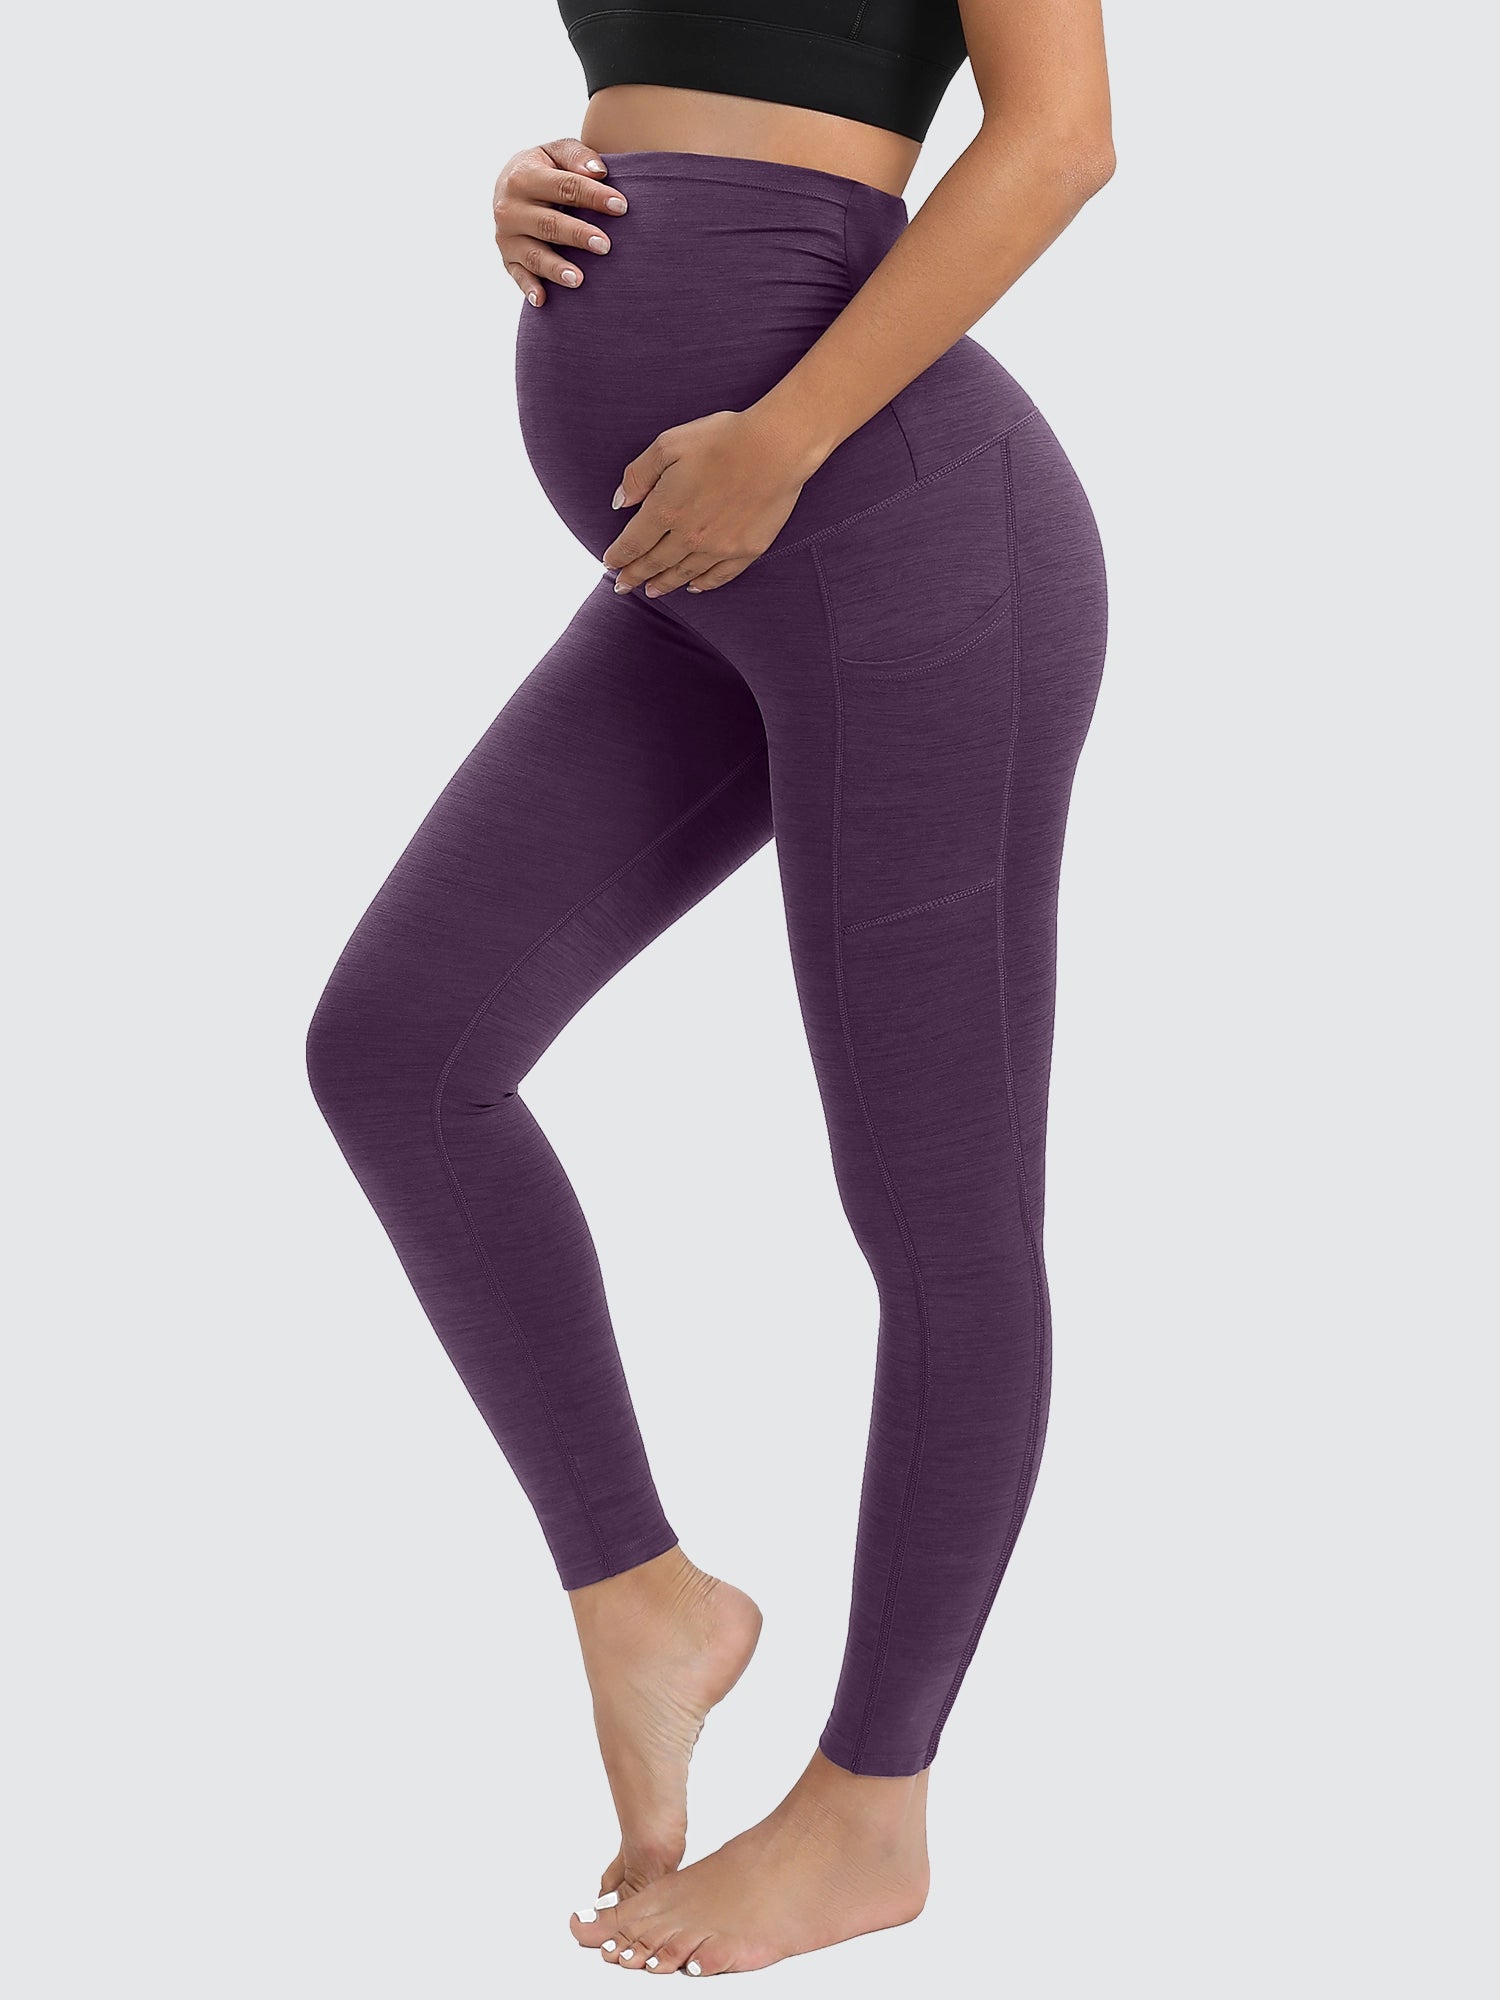 IUGA Supcream Buttery-soft Maternity Legging With Pockets purple